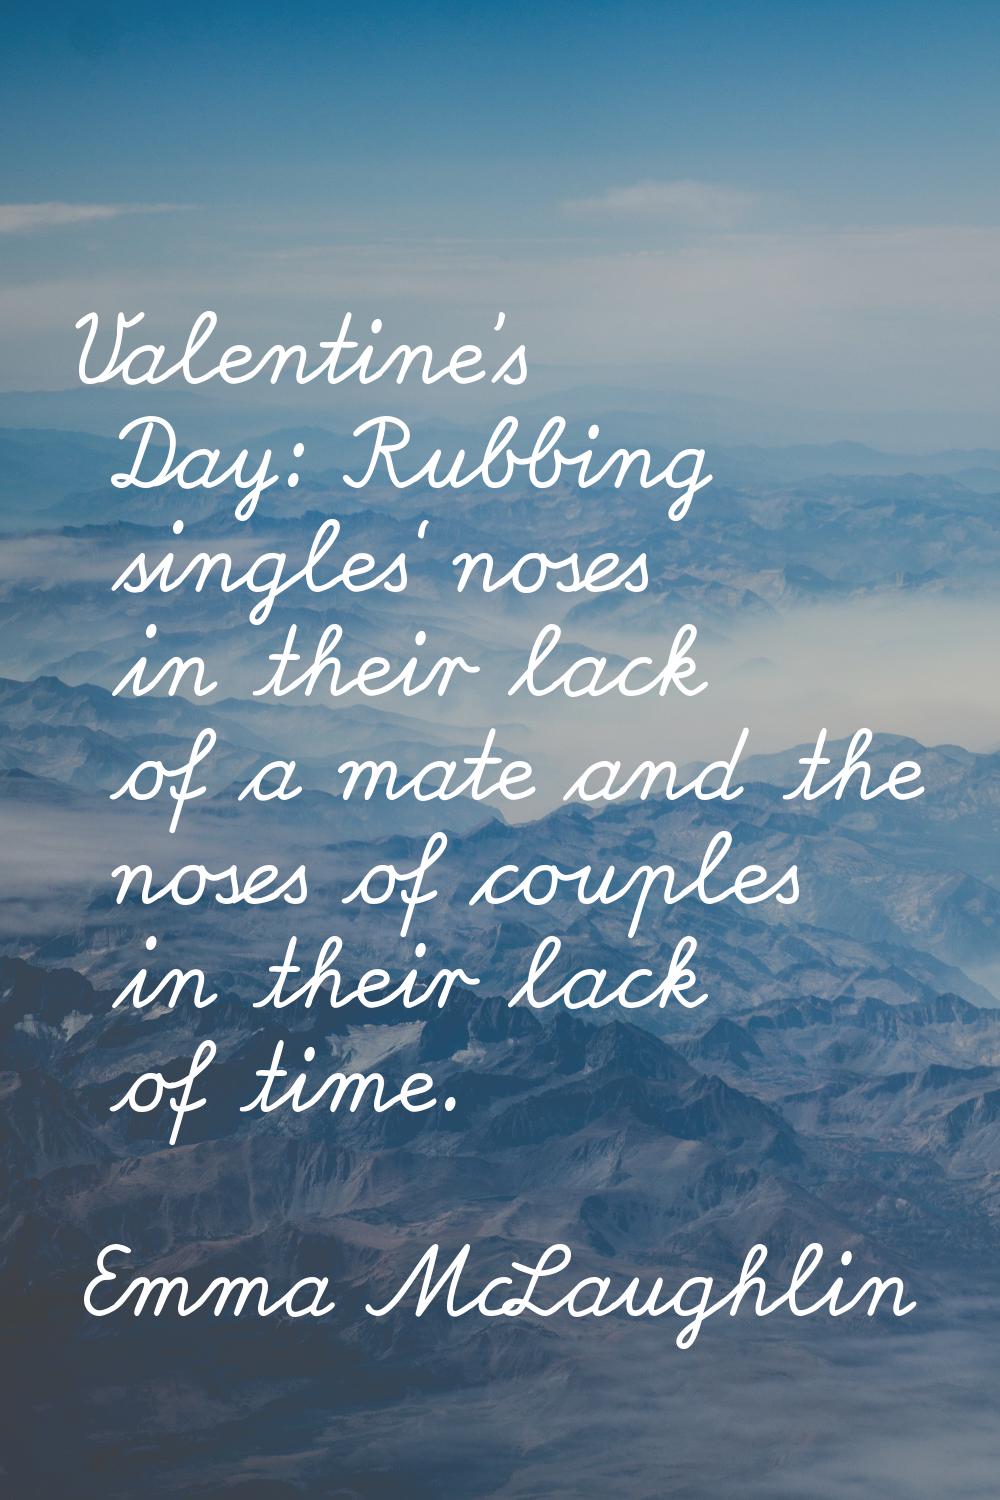 Valentine's Day: Rubbing singles' noses in their lack of a mate and the noses of couples in their l